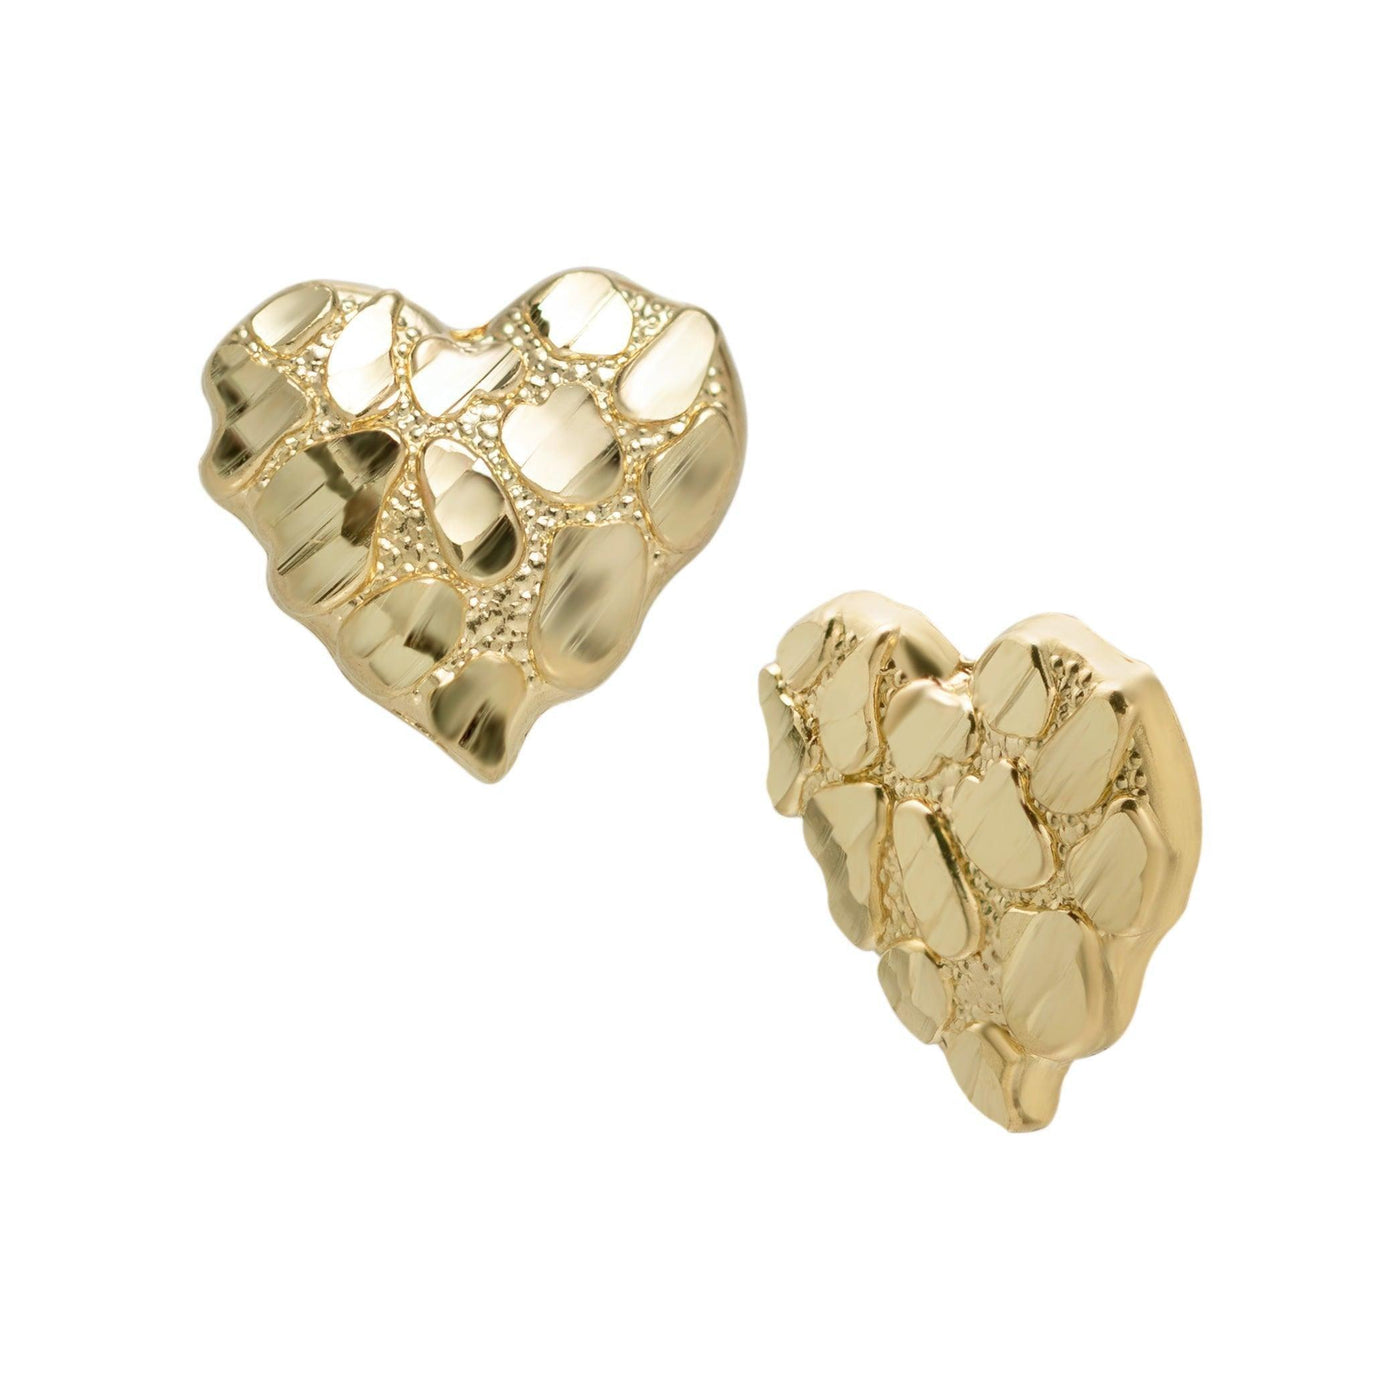 Large Heart Nugget Stud Earrings Solid 10K Yellow Gold - bayamjewelry